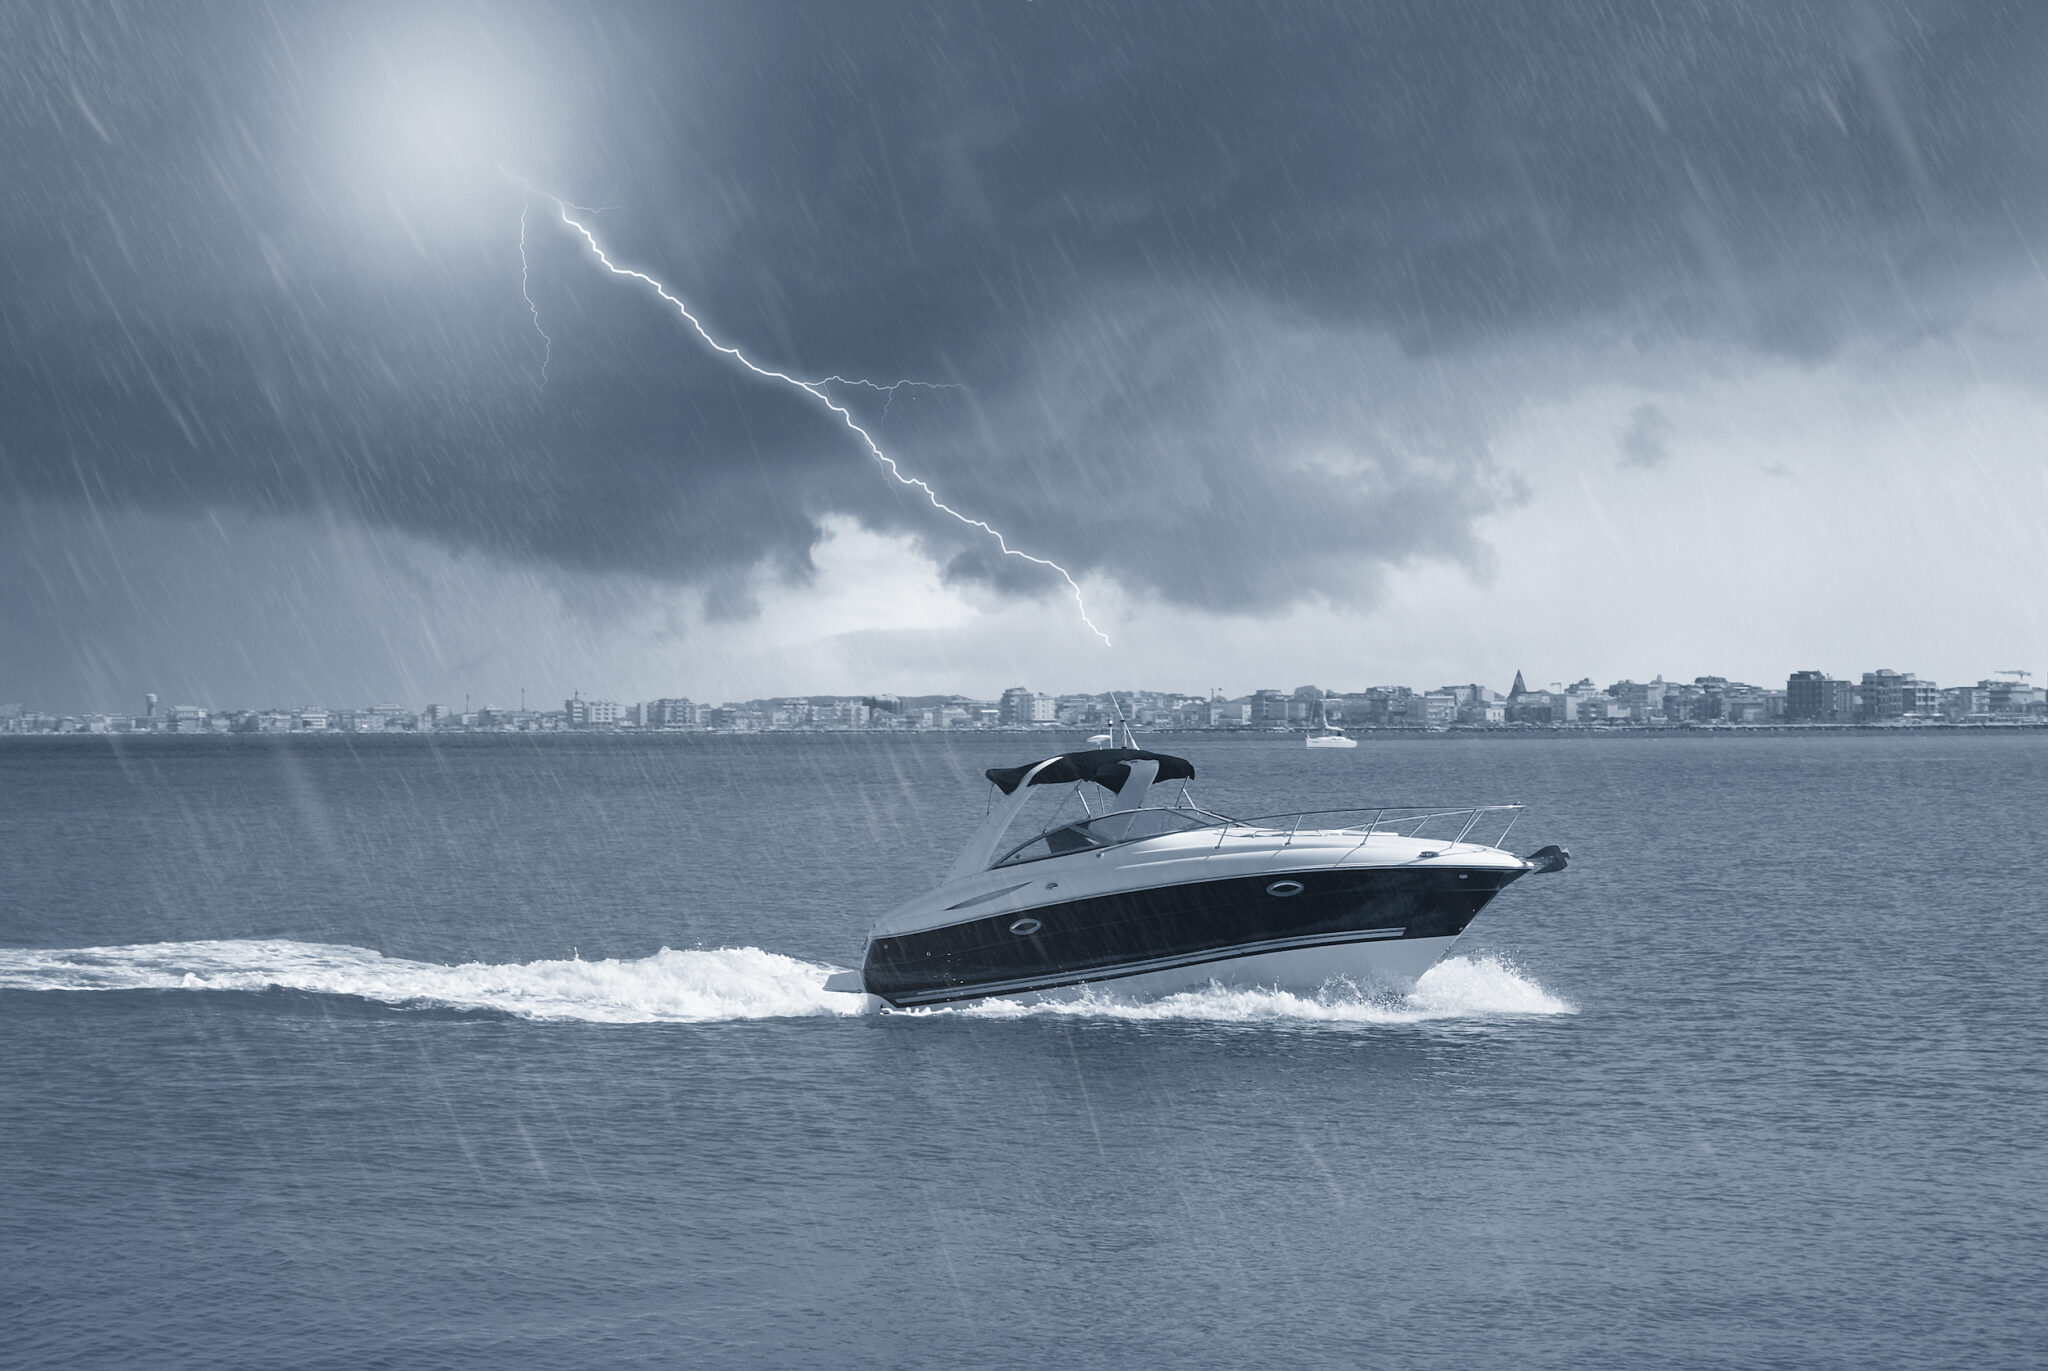 yacht in storm